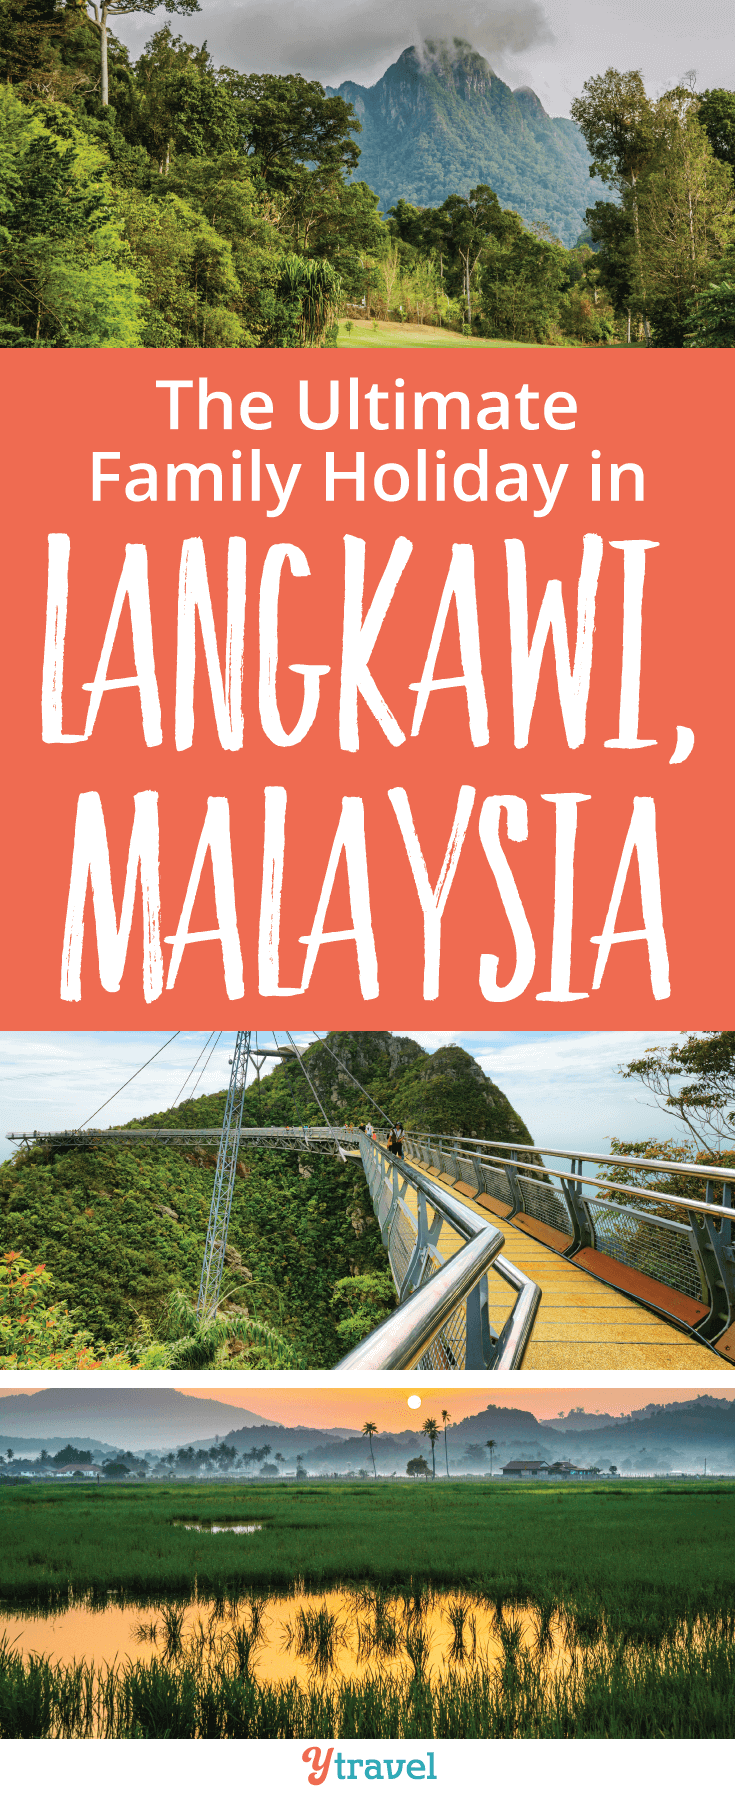 Langkawi, Malaysia is a great destination for a family holiday. The island offers great food, awesome beaches and amazing nature and wildlife!